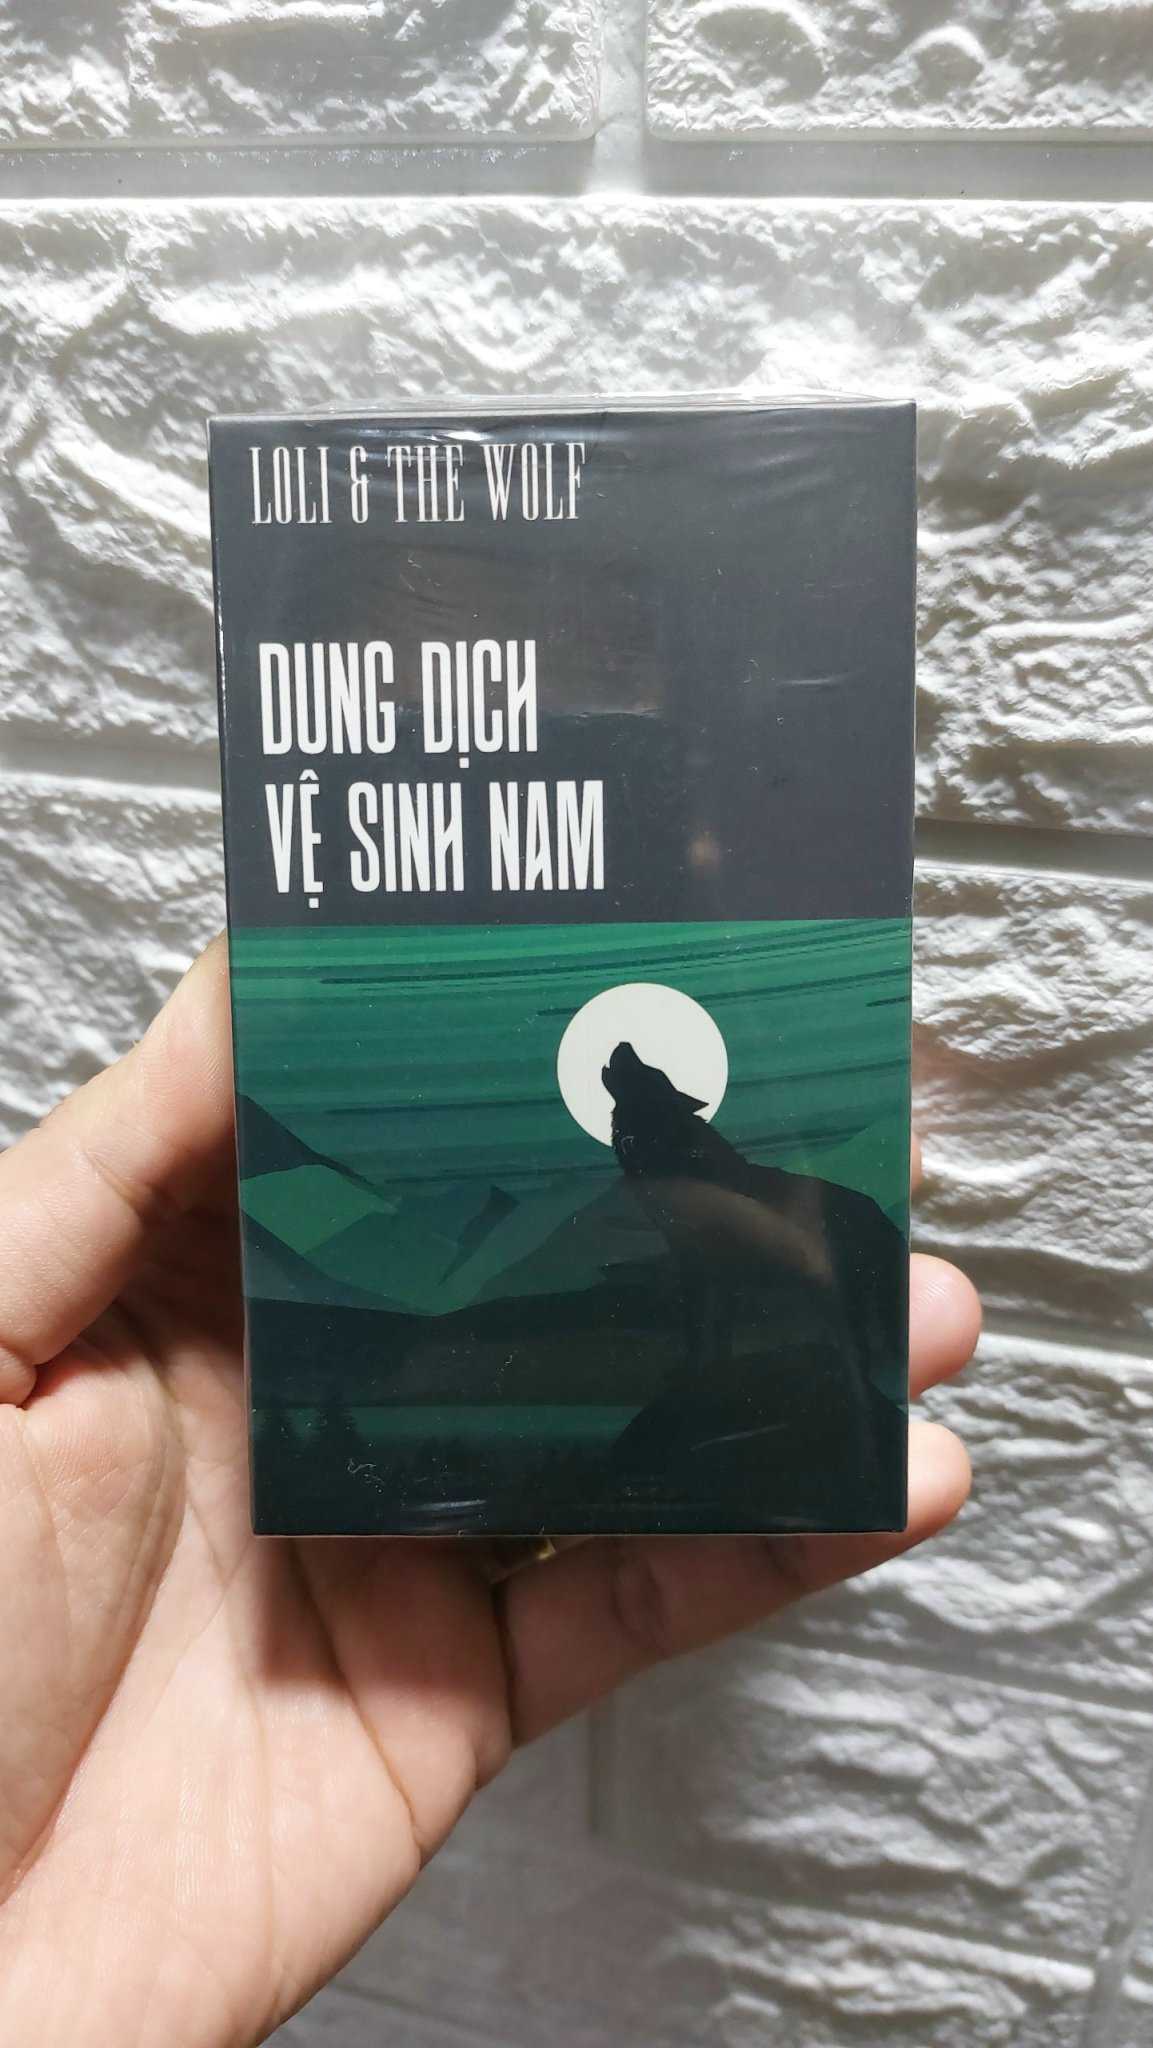 Dung-dich-ve-sinh-nam-LOLI-THE-WOLF.jpg